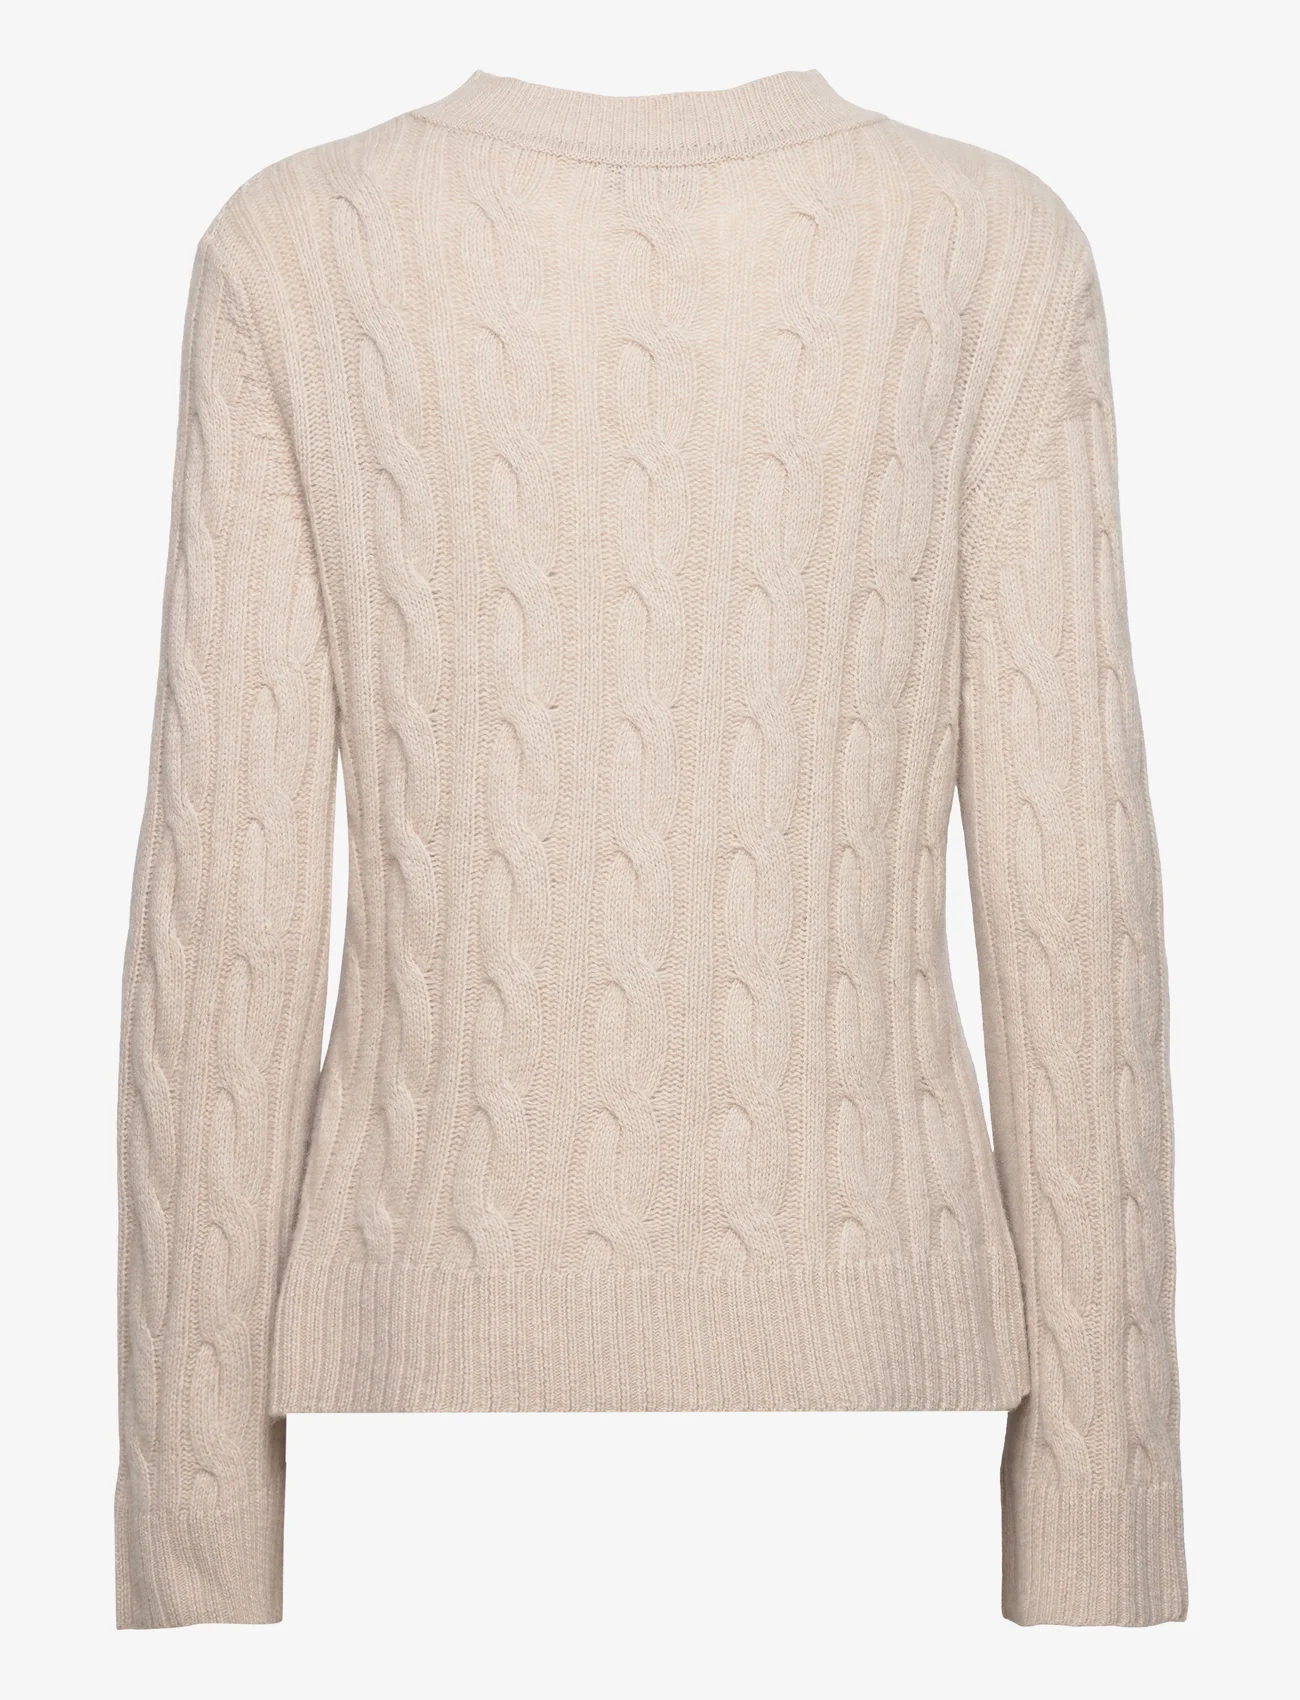 Marville Road - Sibyll Cable Knit Jumper - jumpers - oat - 1